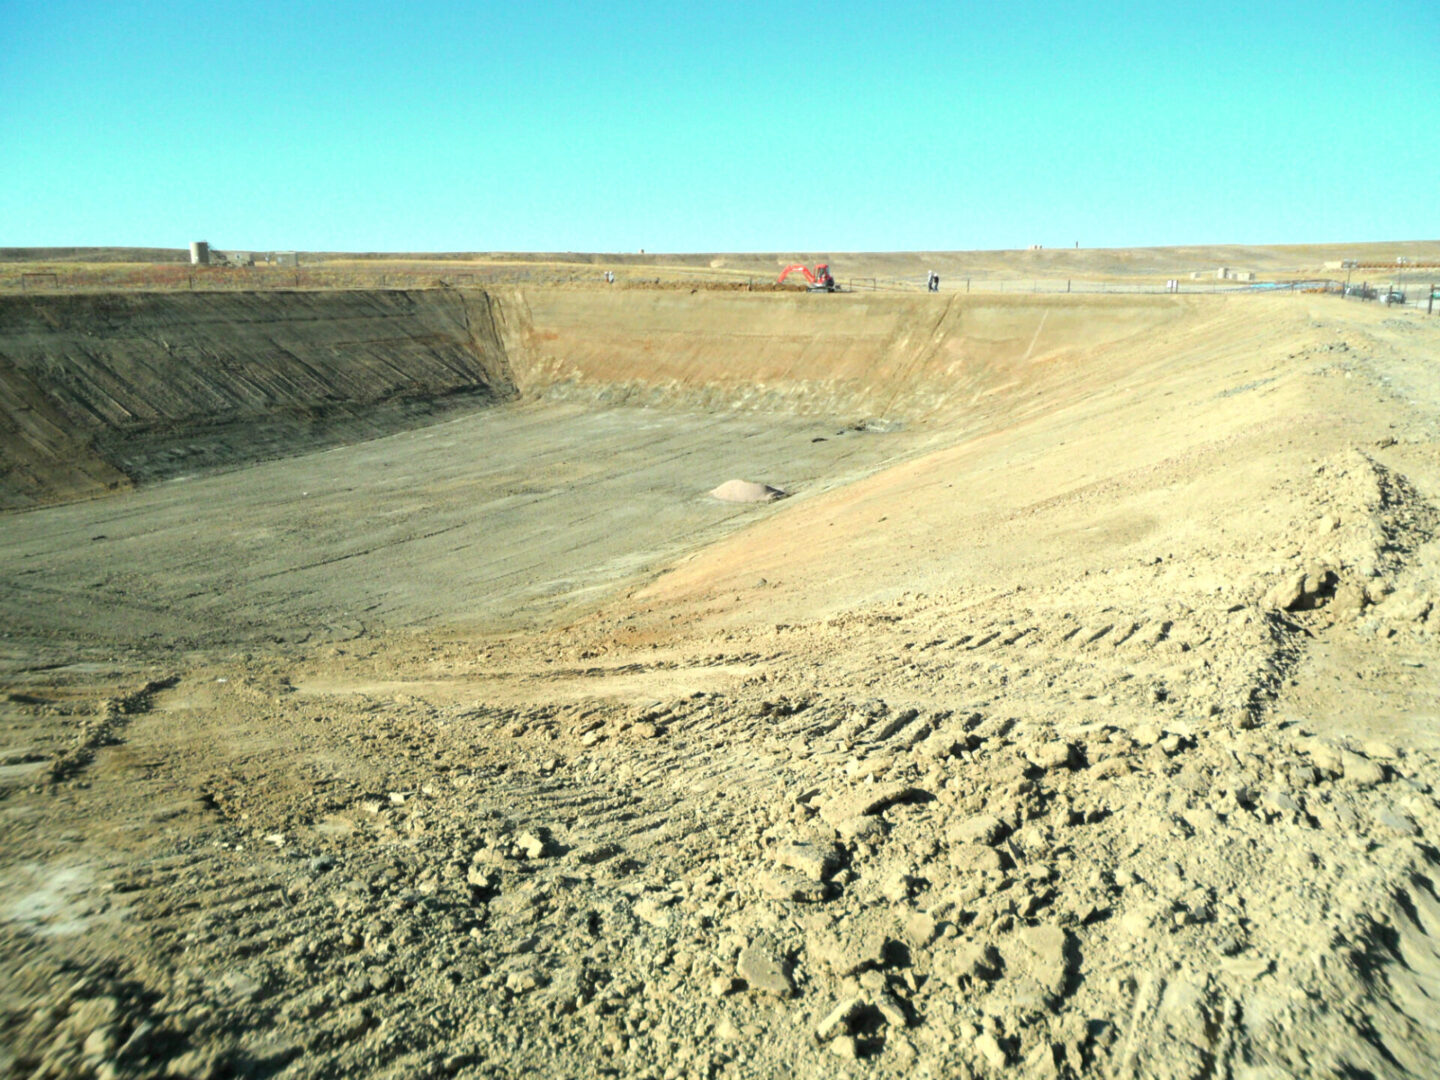 A dirt field with a large open pit in the background.